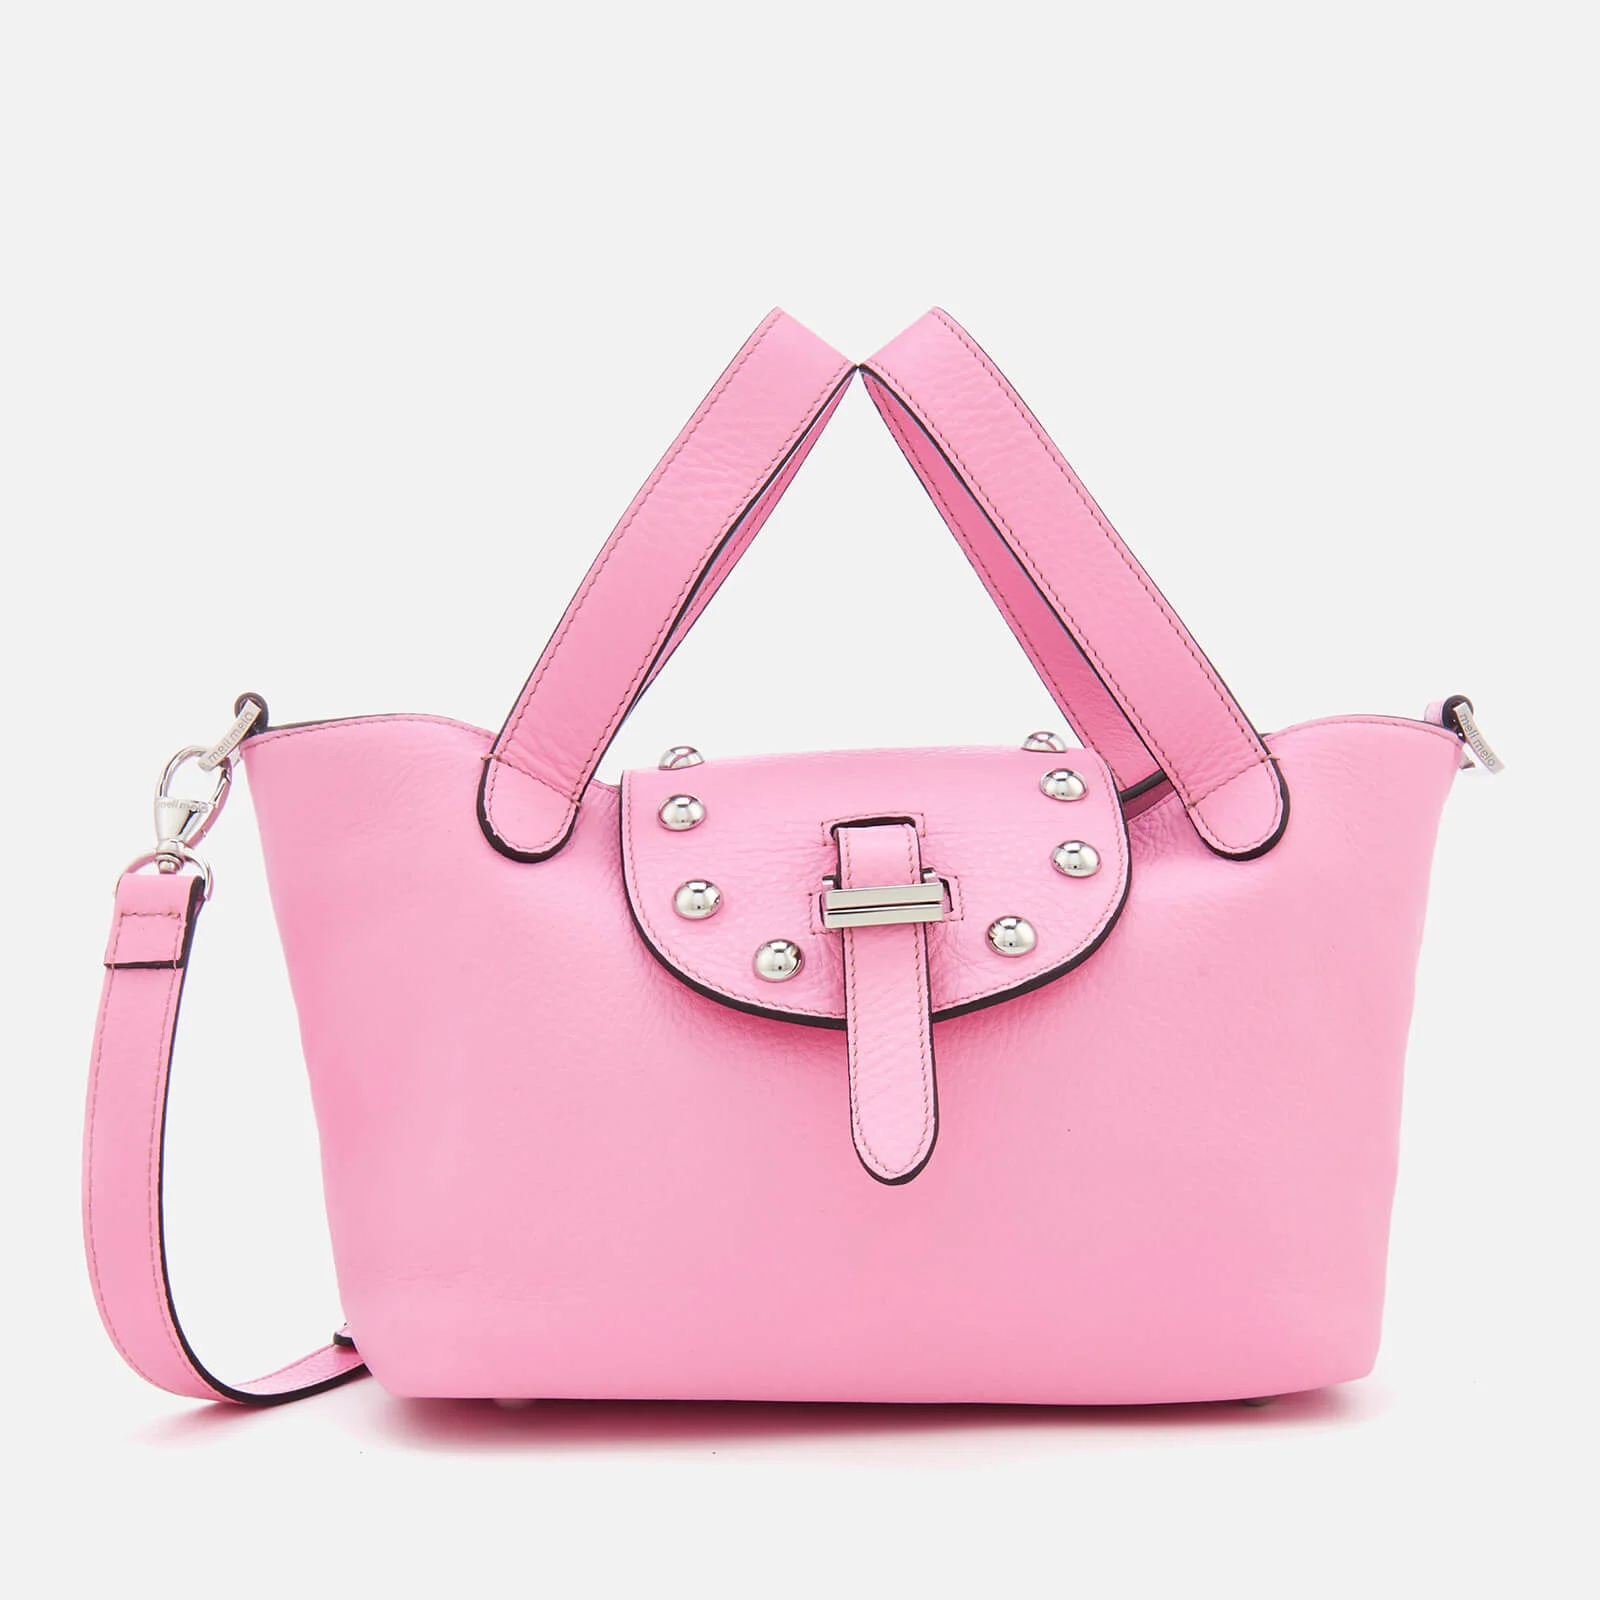 meli melo Women's Thela Mini Tote Bag with Studs - Peony Pink Image 1